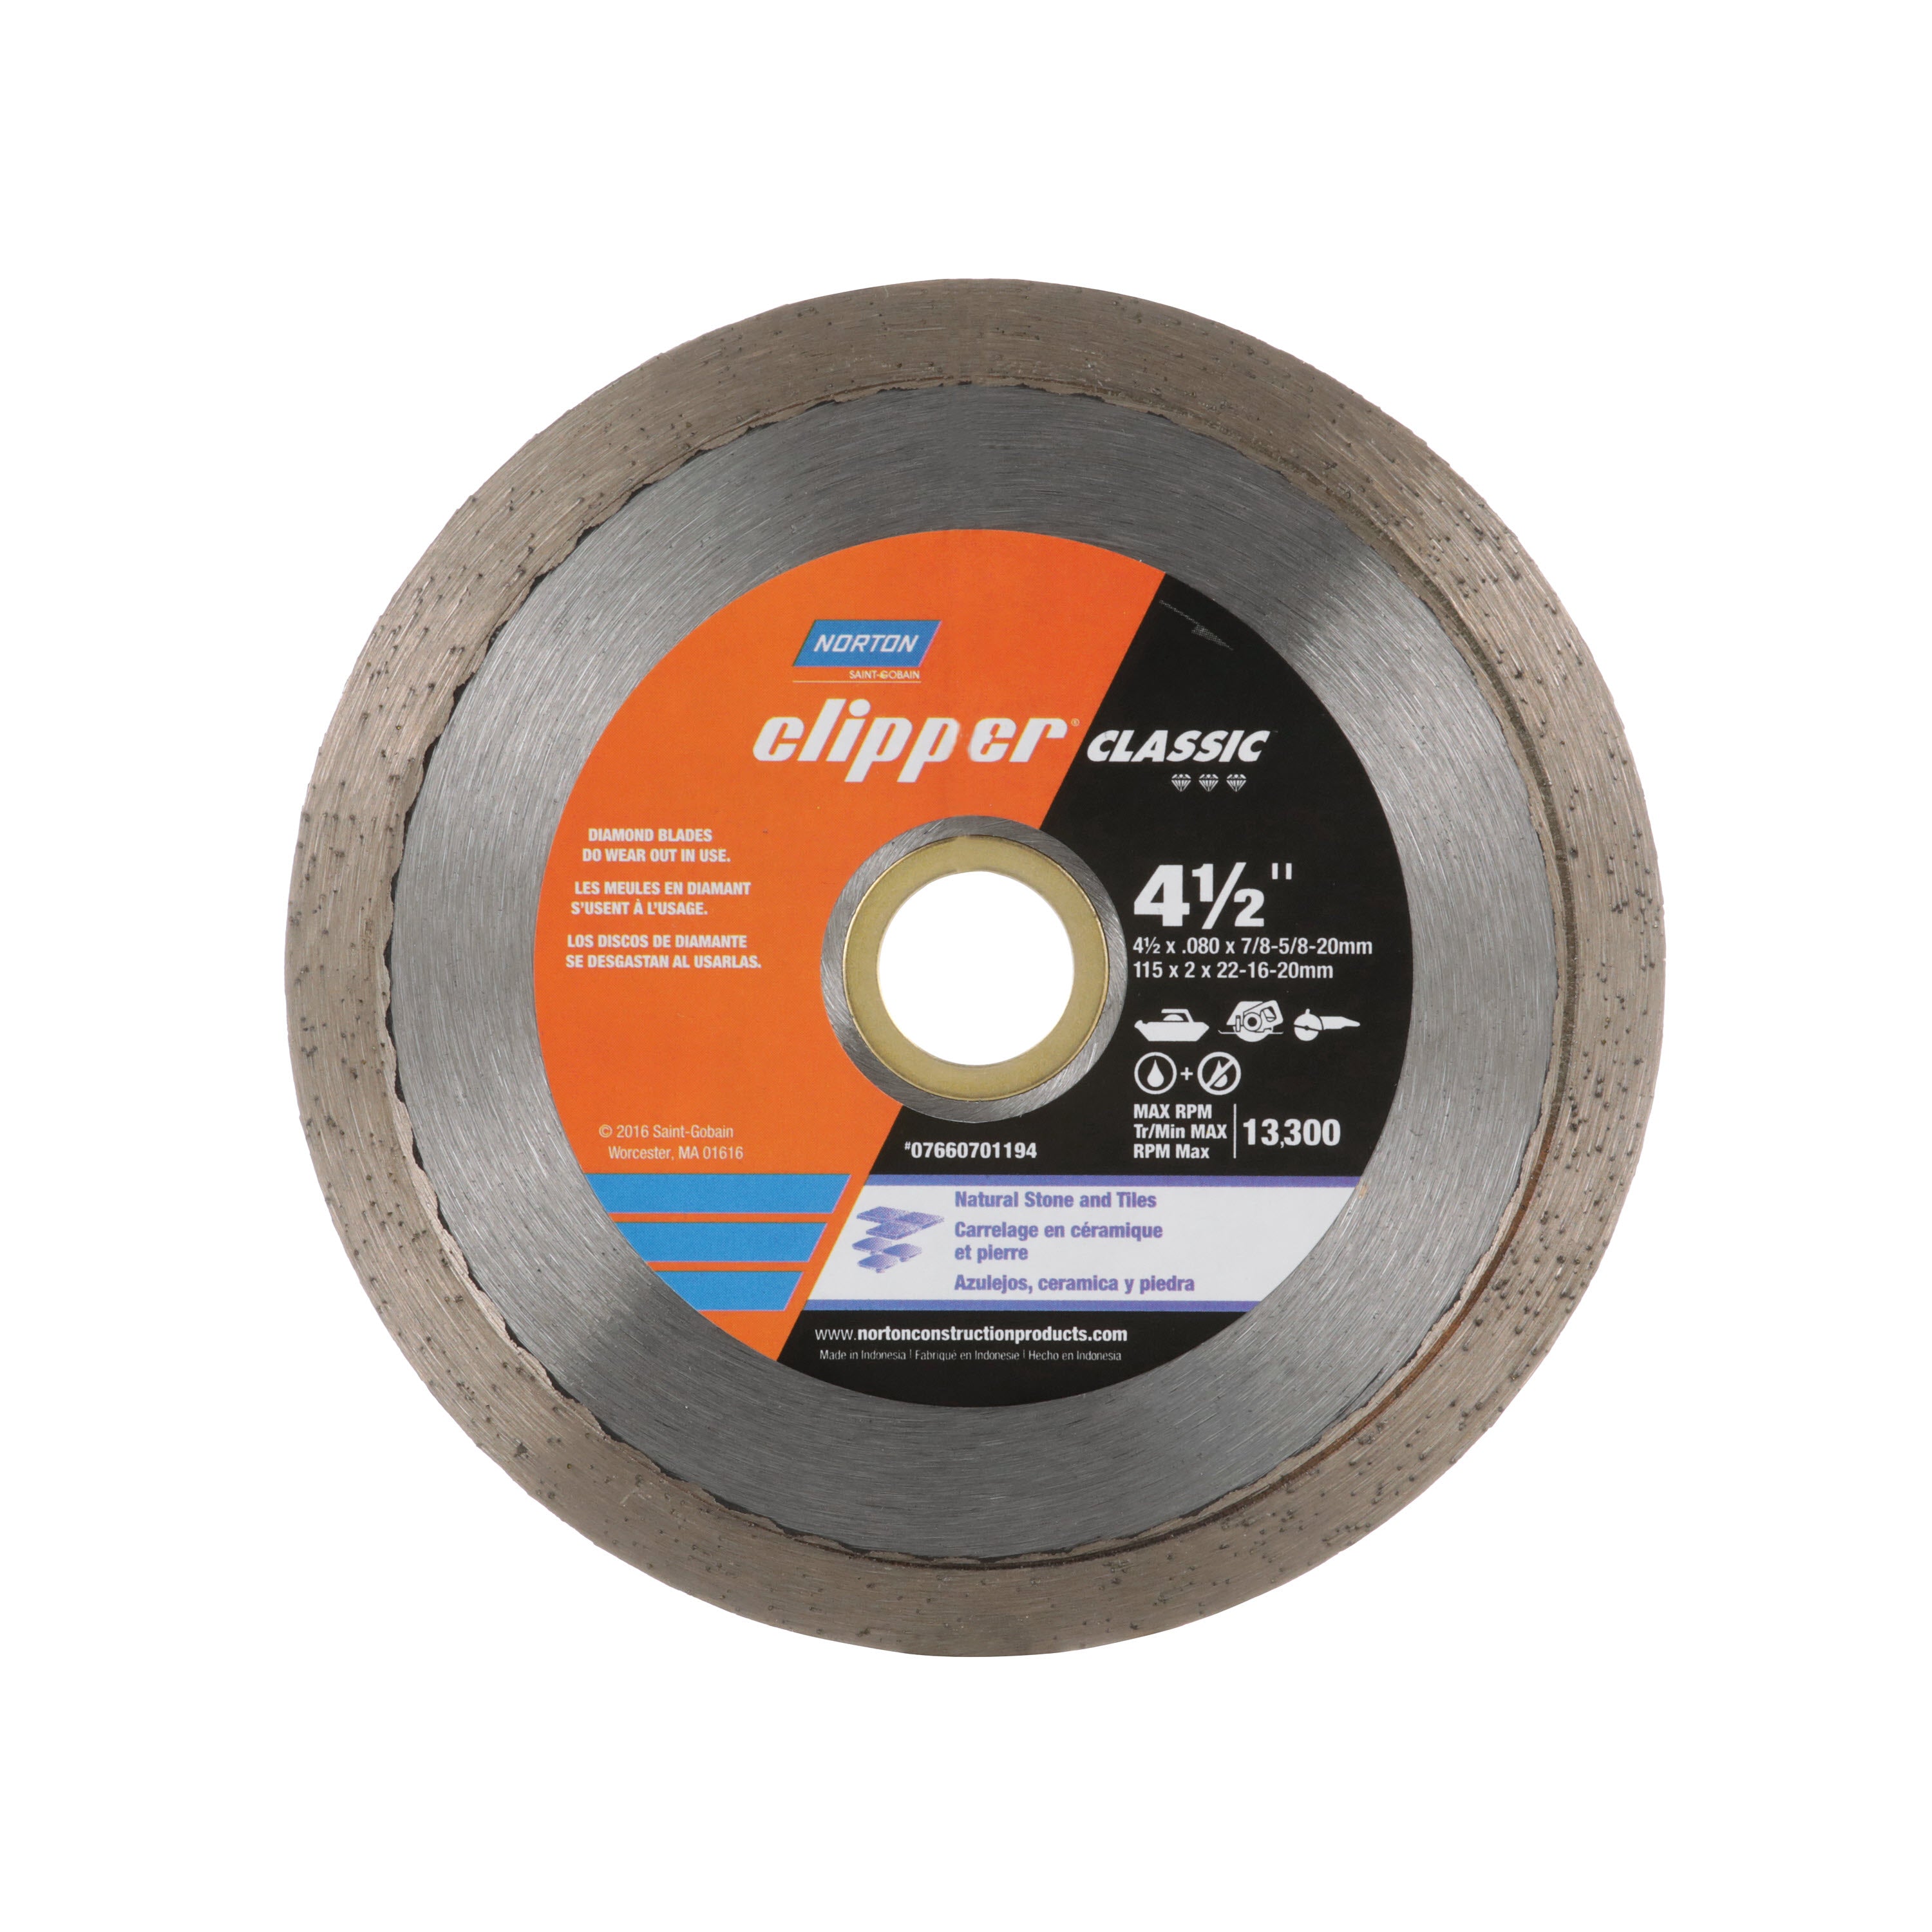 Clipper Classic 4-1/2in Natural Stone Dry Continuous Rim Tile Blade